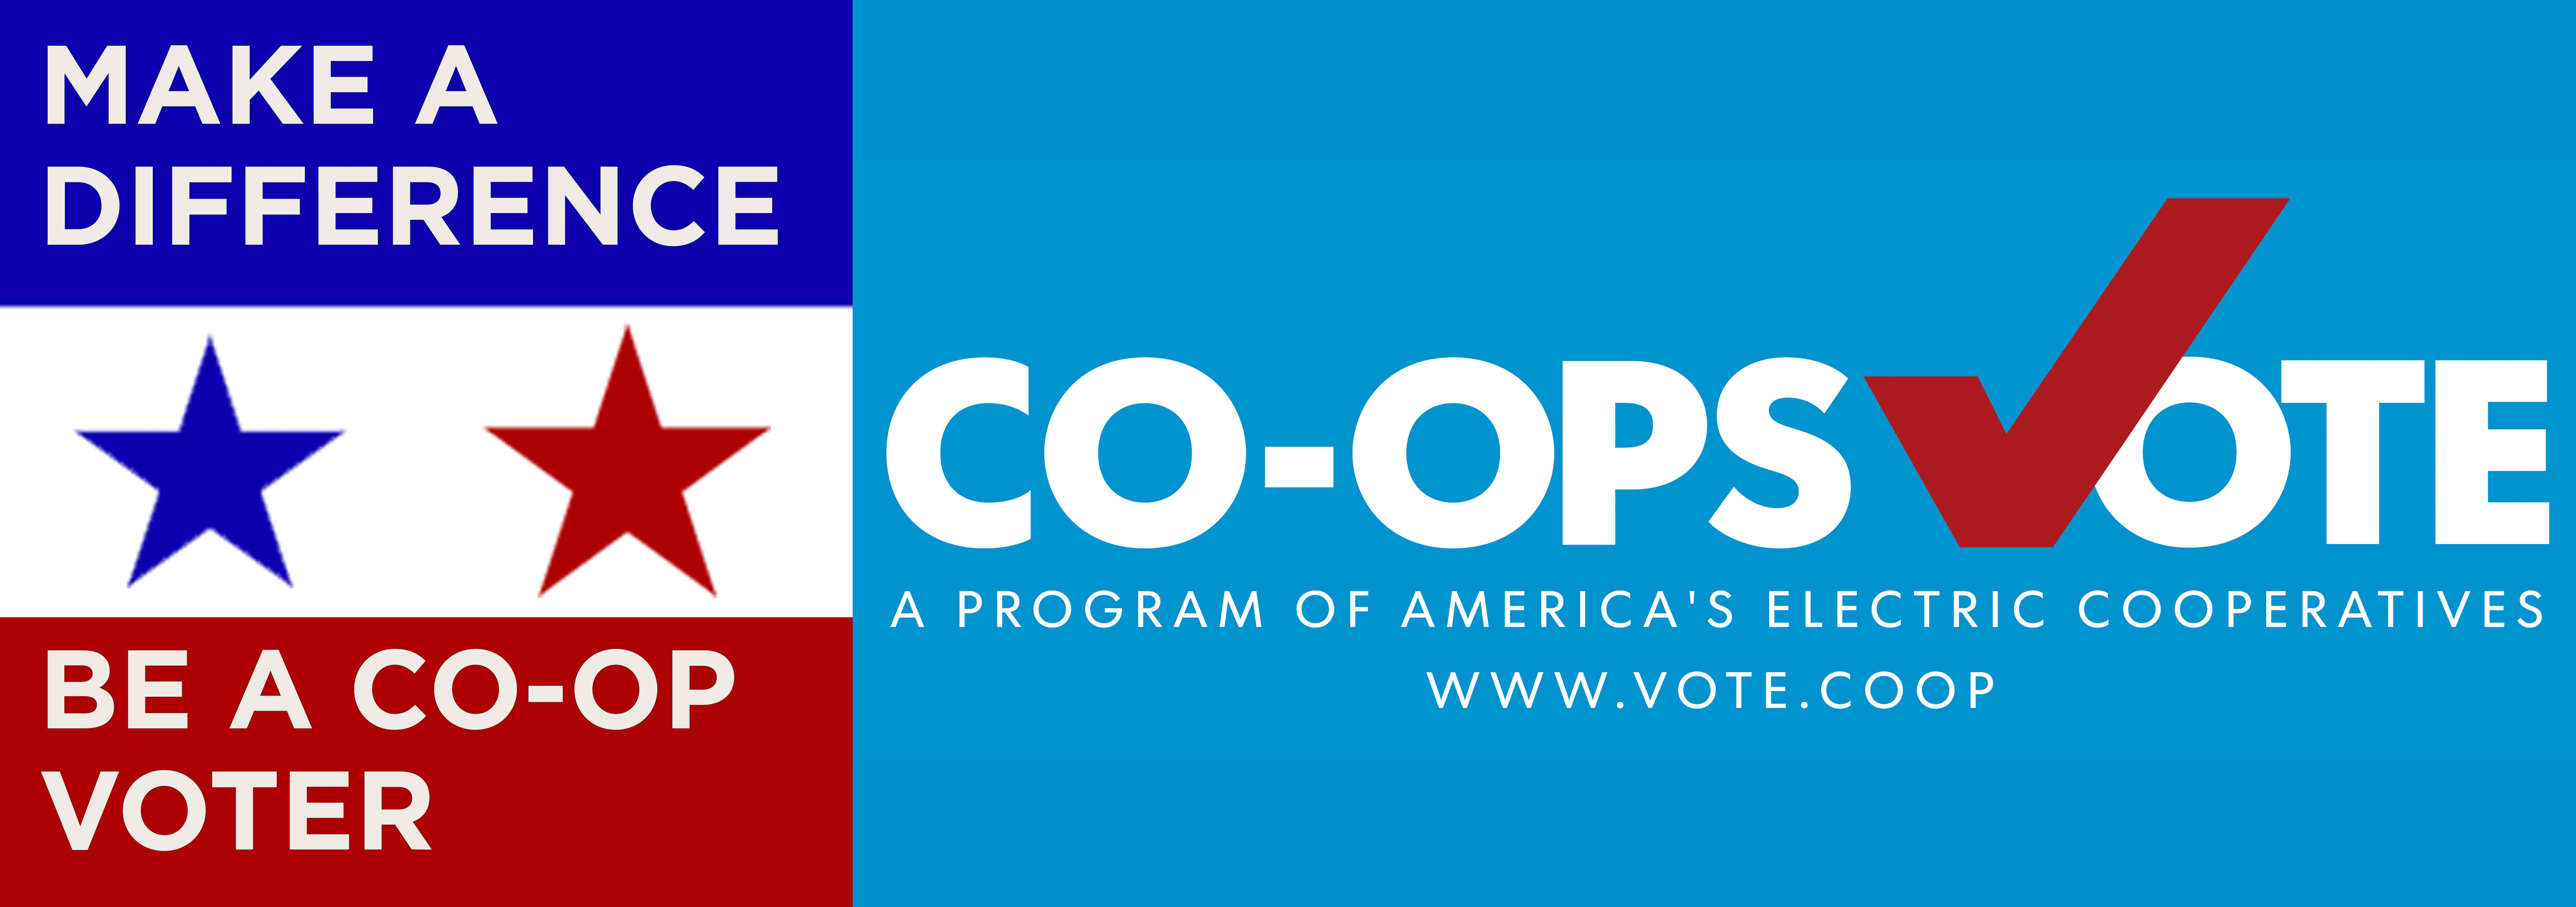 Co-ops Vote